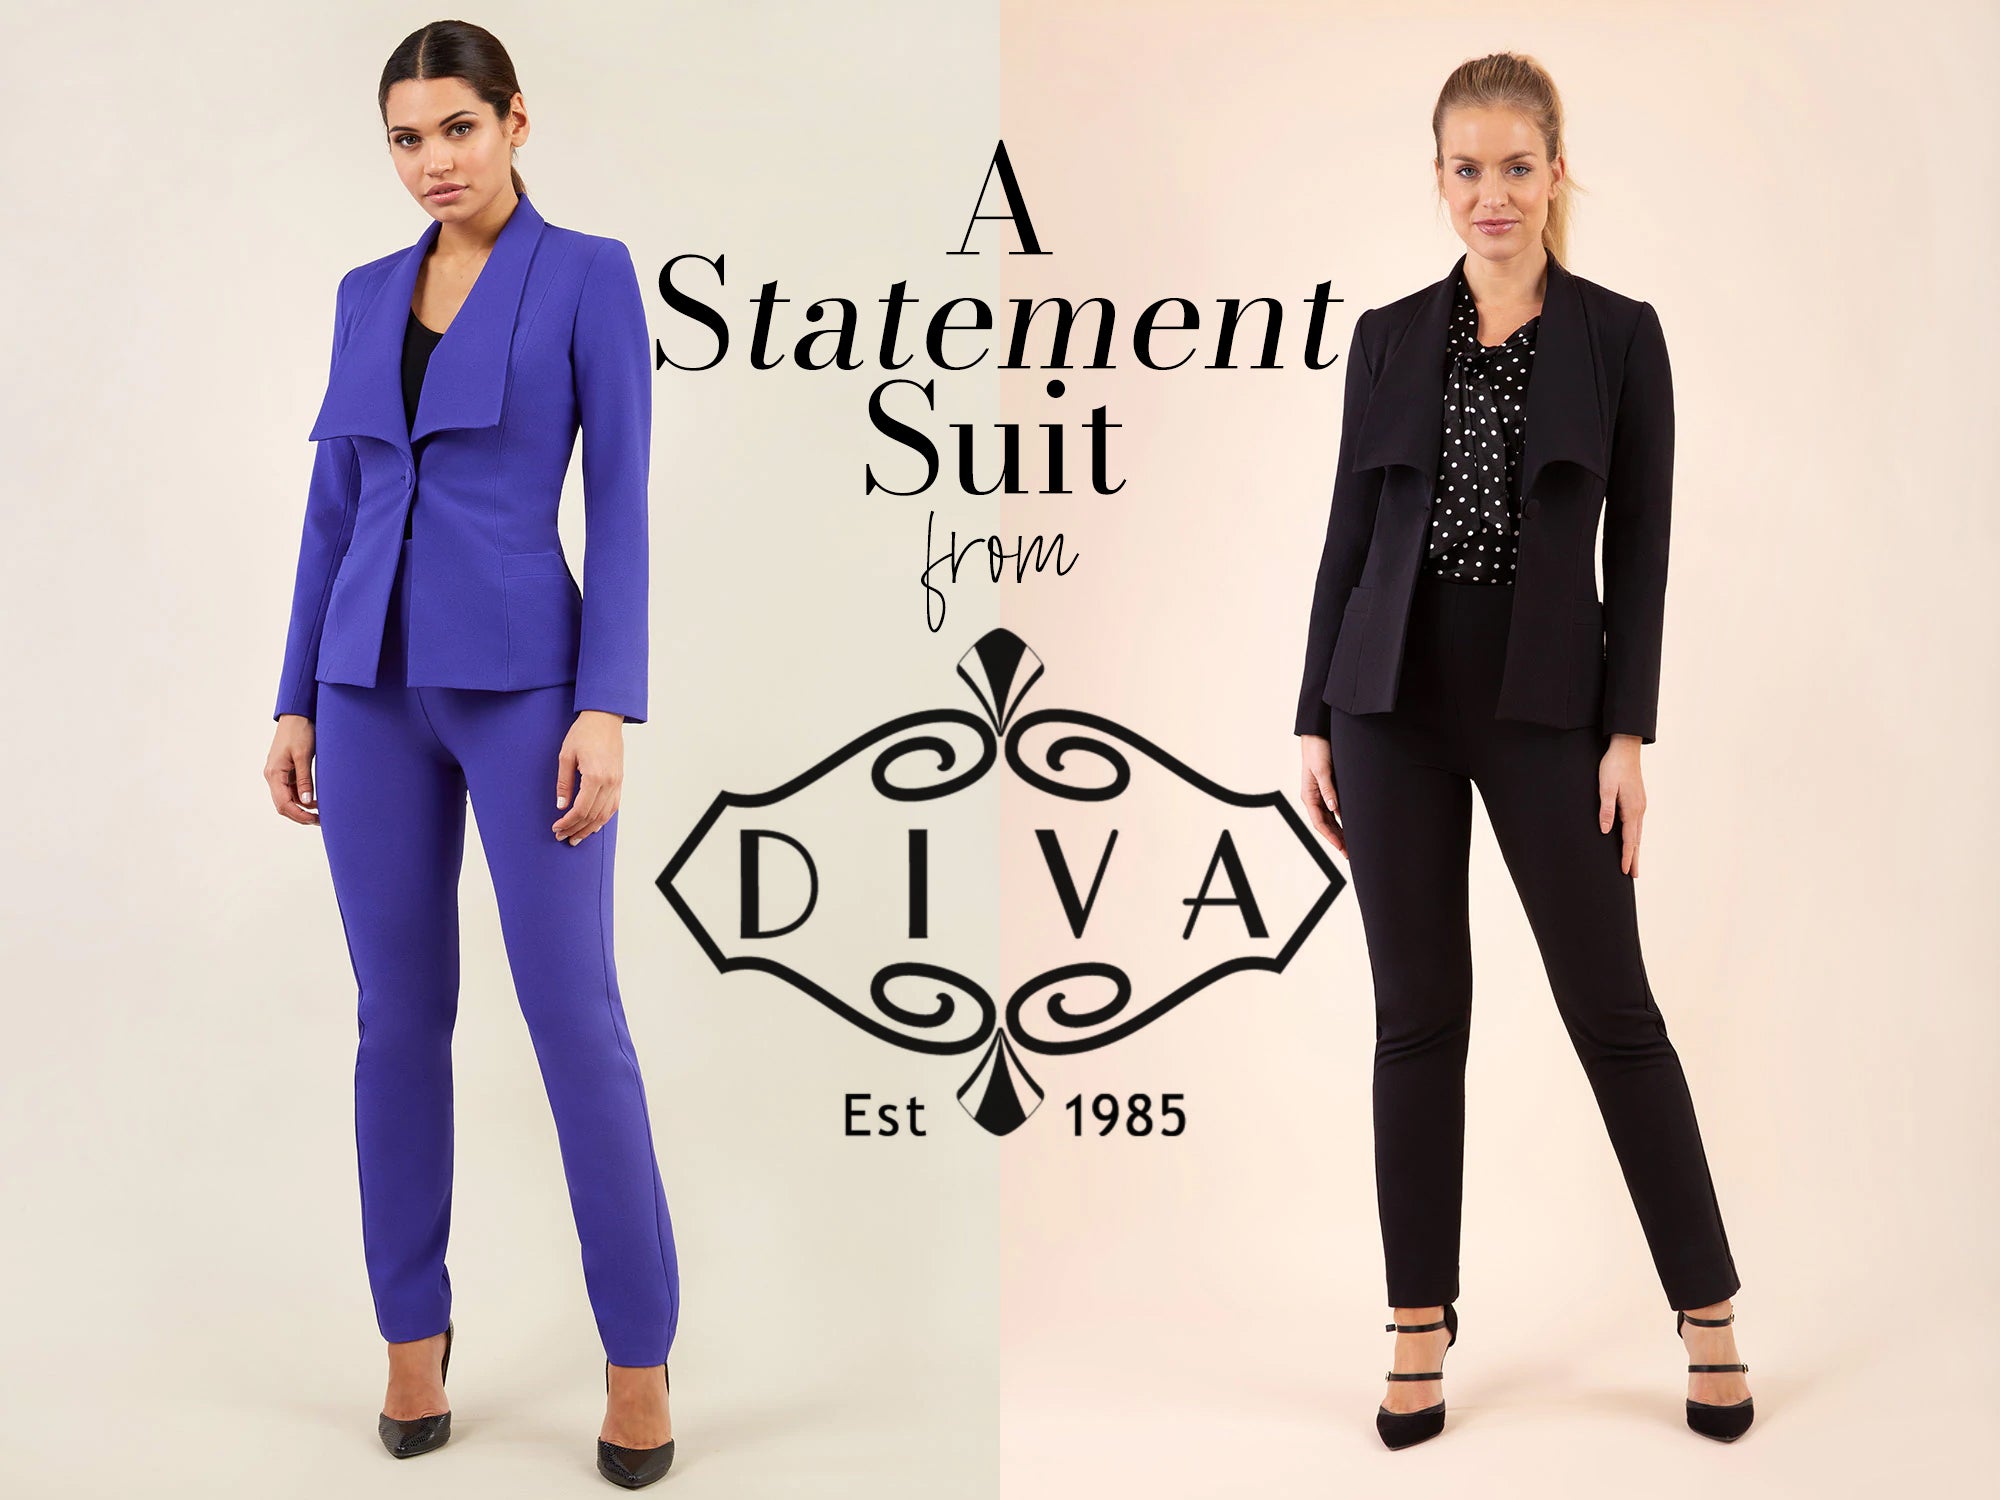 two images combined with the logo for Diva Catwalk and showing two suits - one in blue and the other black.